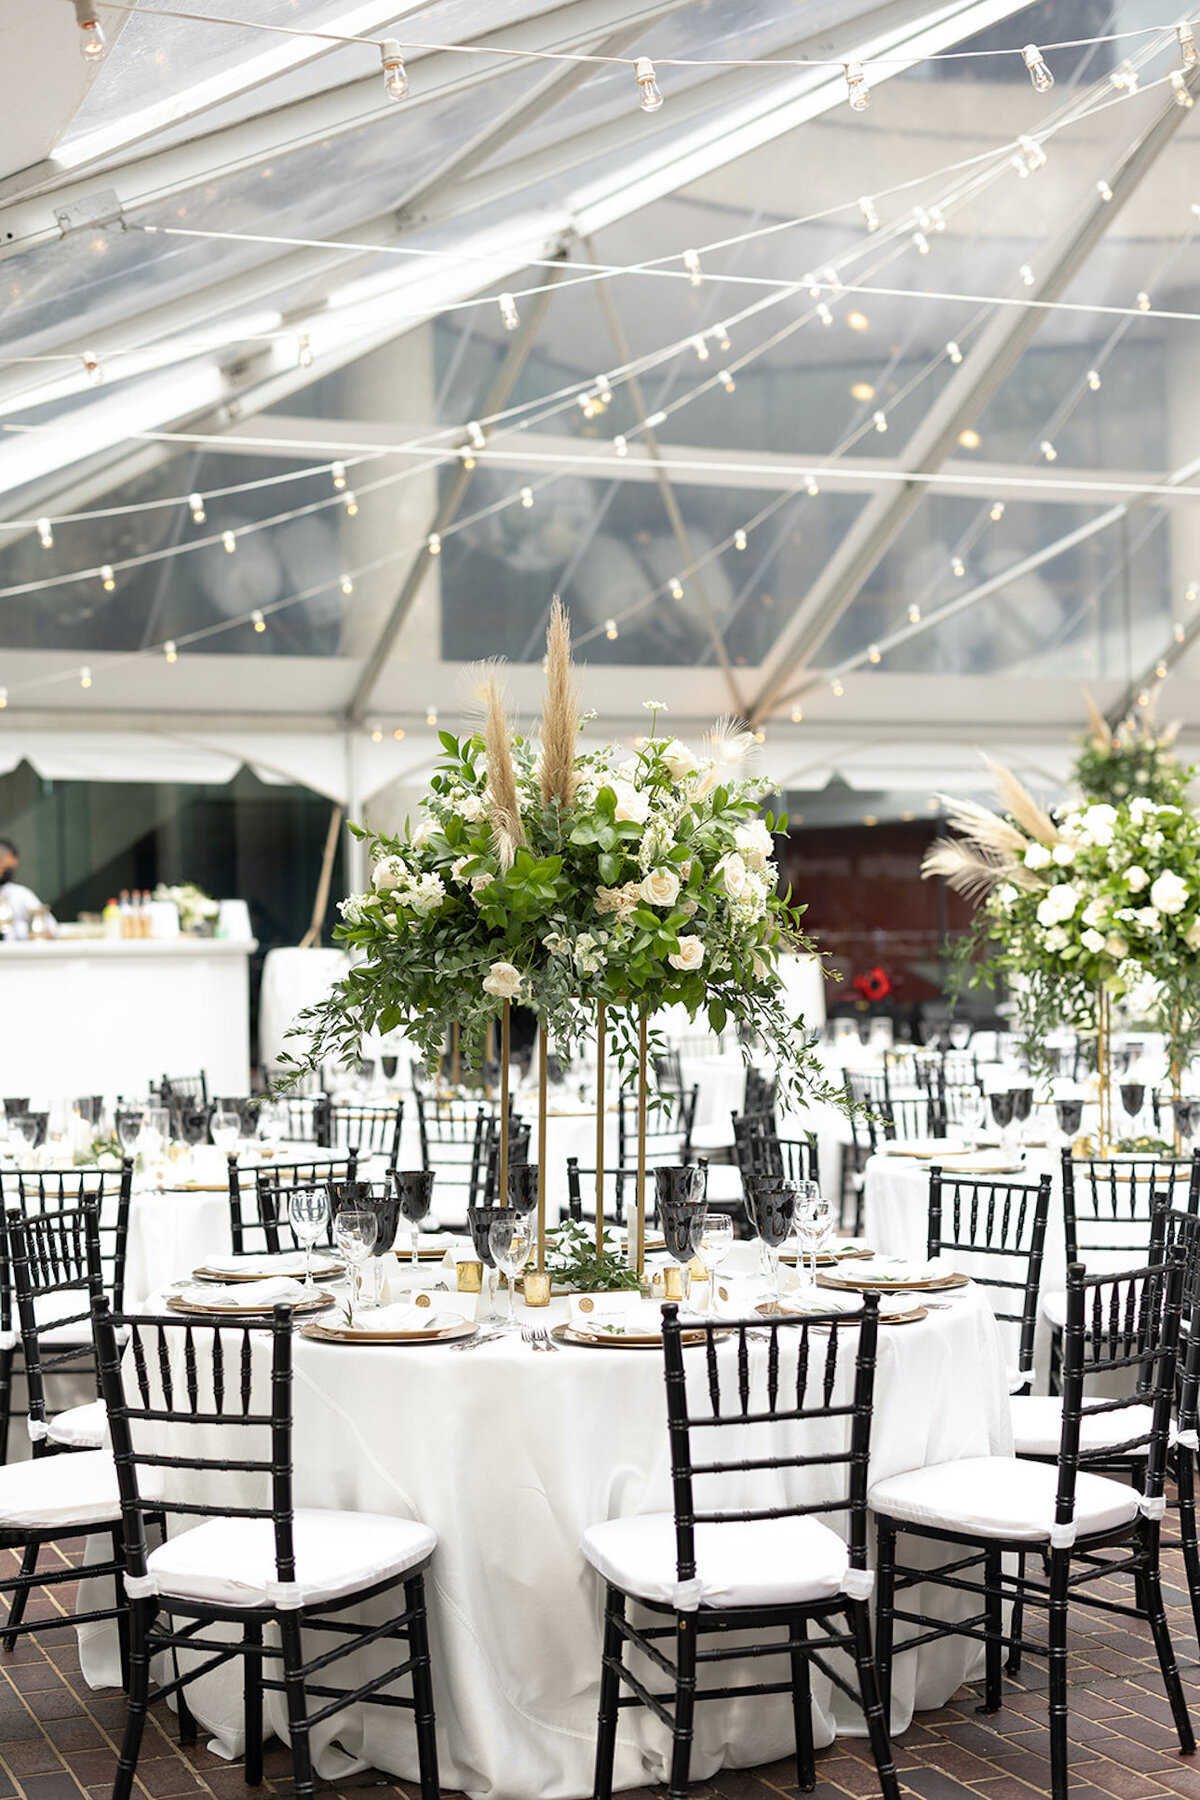 Elise-Connor-American-Institute-of-architects-Wedding-The-finer-points-event-planning-genevieve-leiper-photography00035